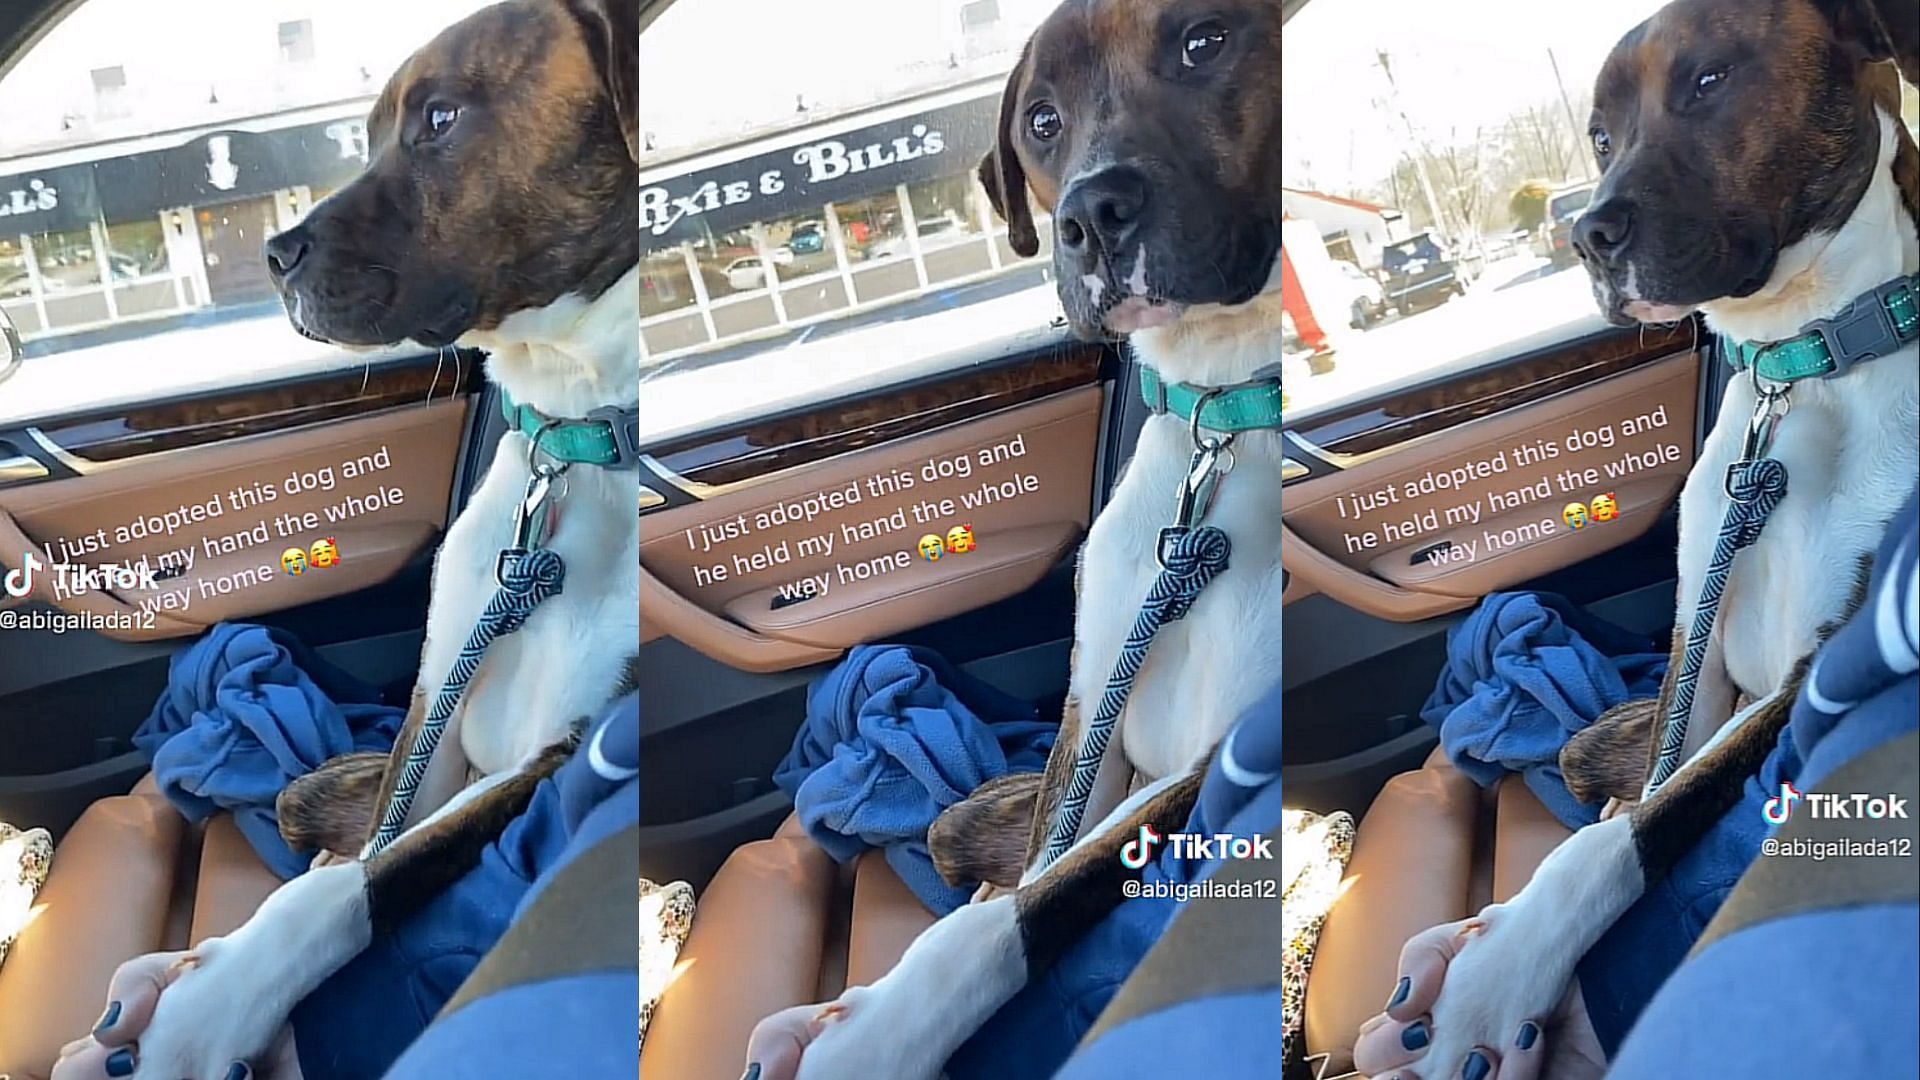 Adopted dog wins the internet after holding new owner